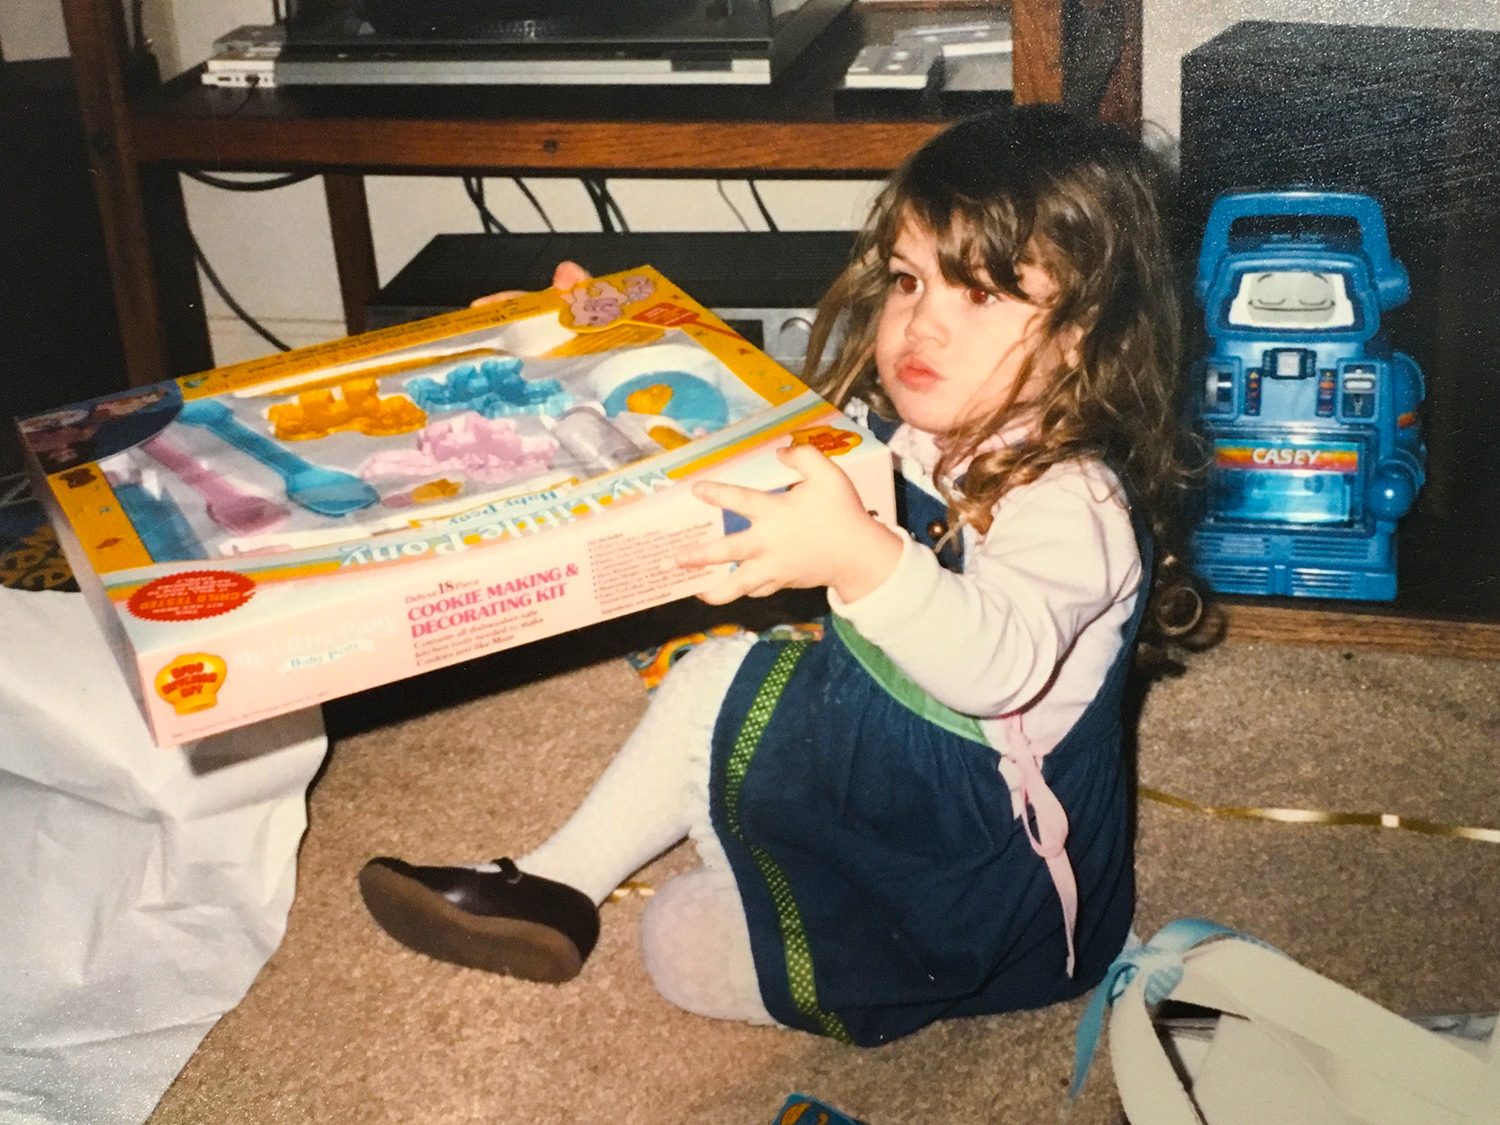 Sterling as a toddler sits on the ground holding a cookie making and decorating toy, still in packaging. Wrapping paper and ribbon are on the floor around her. 